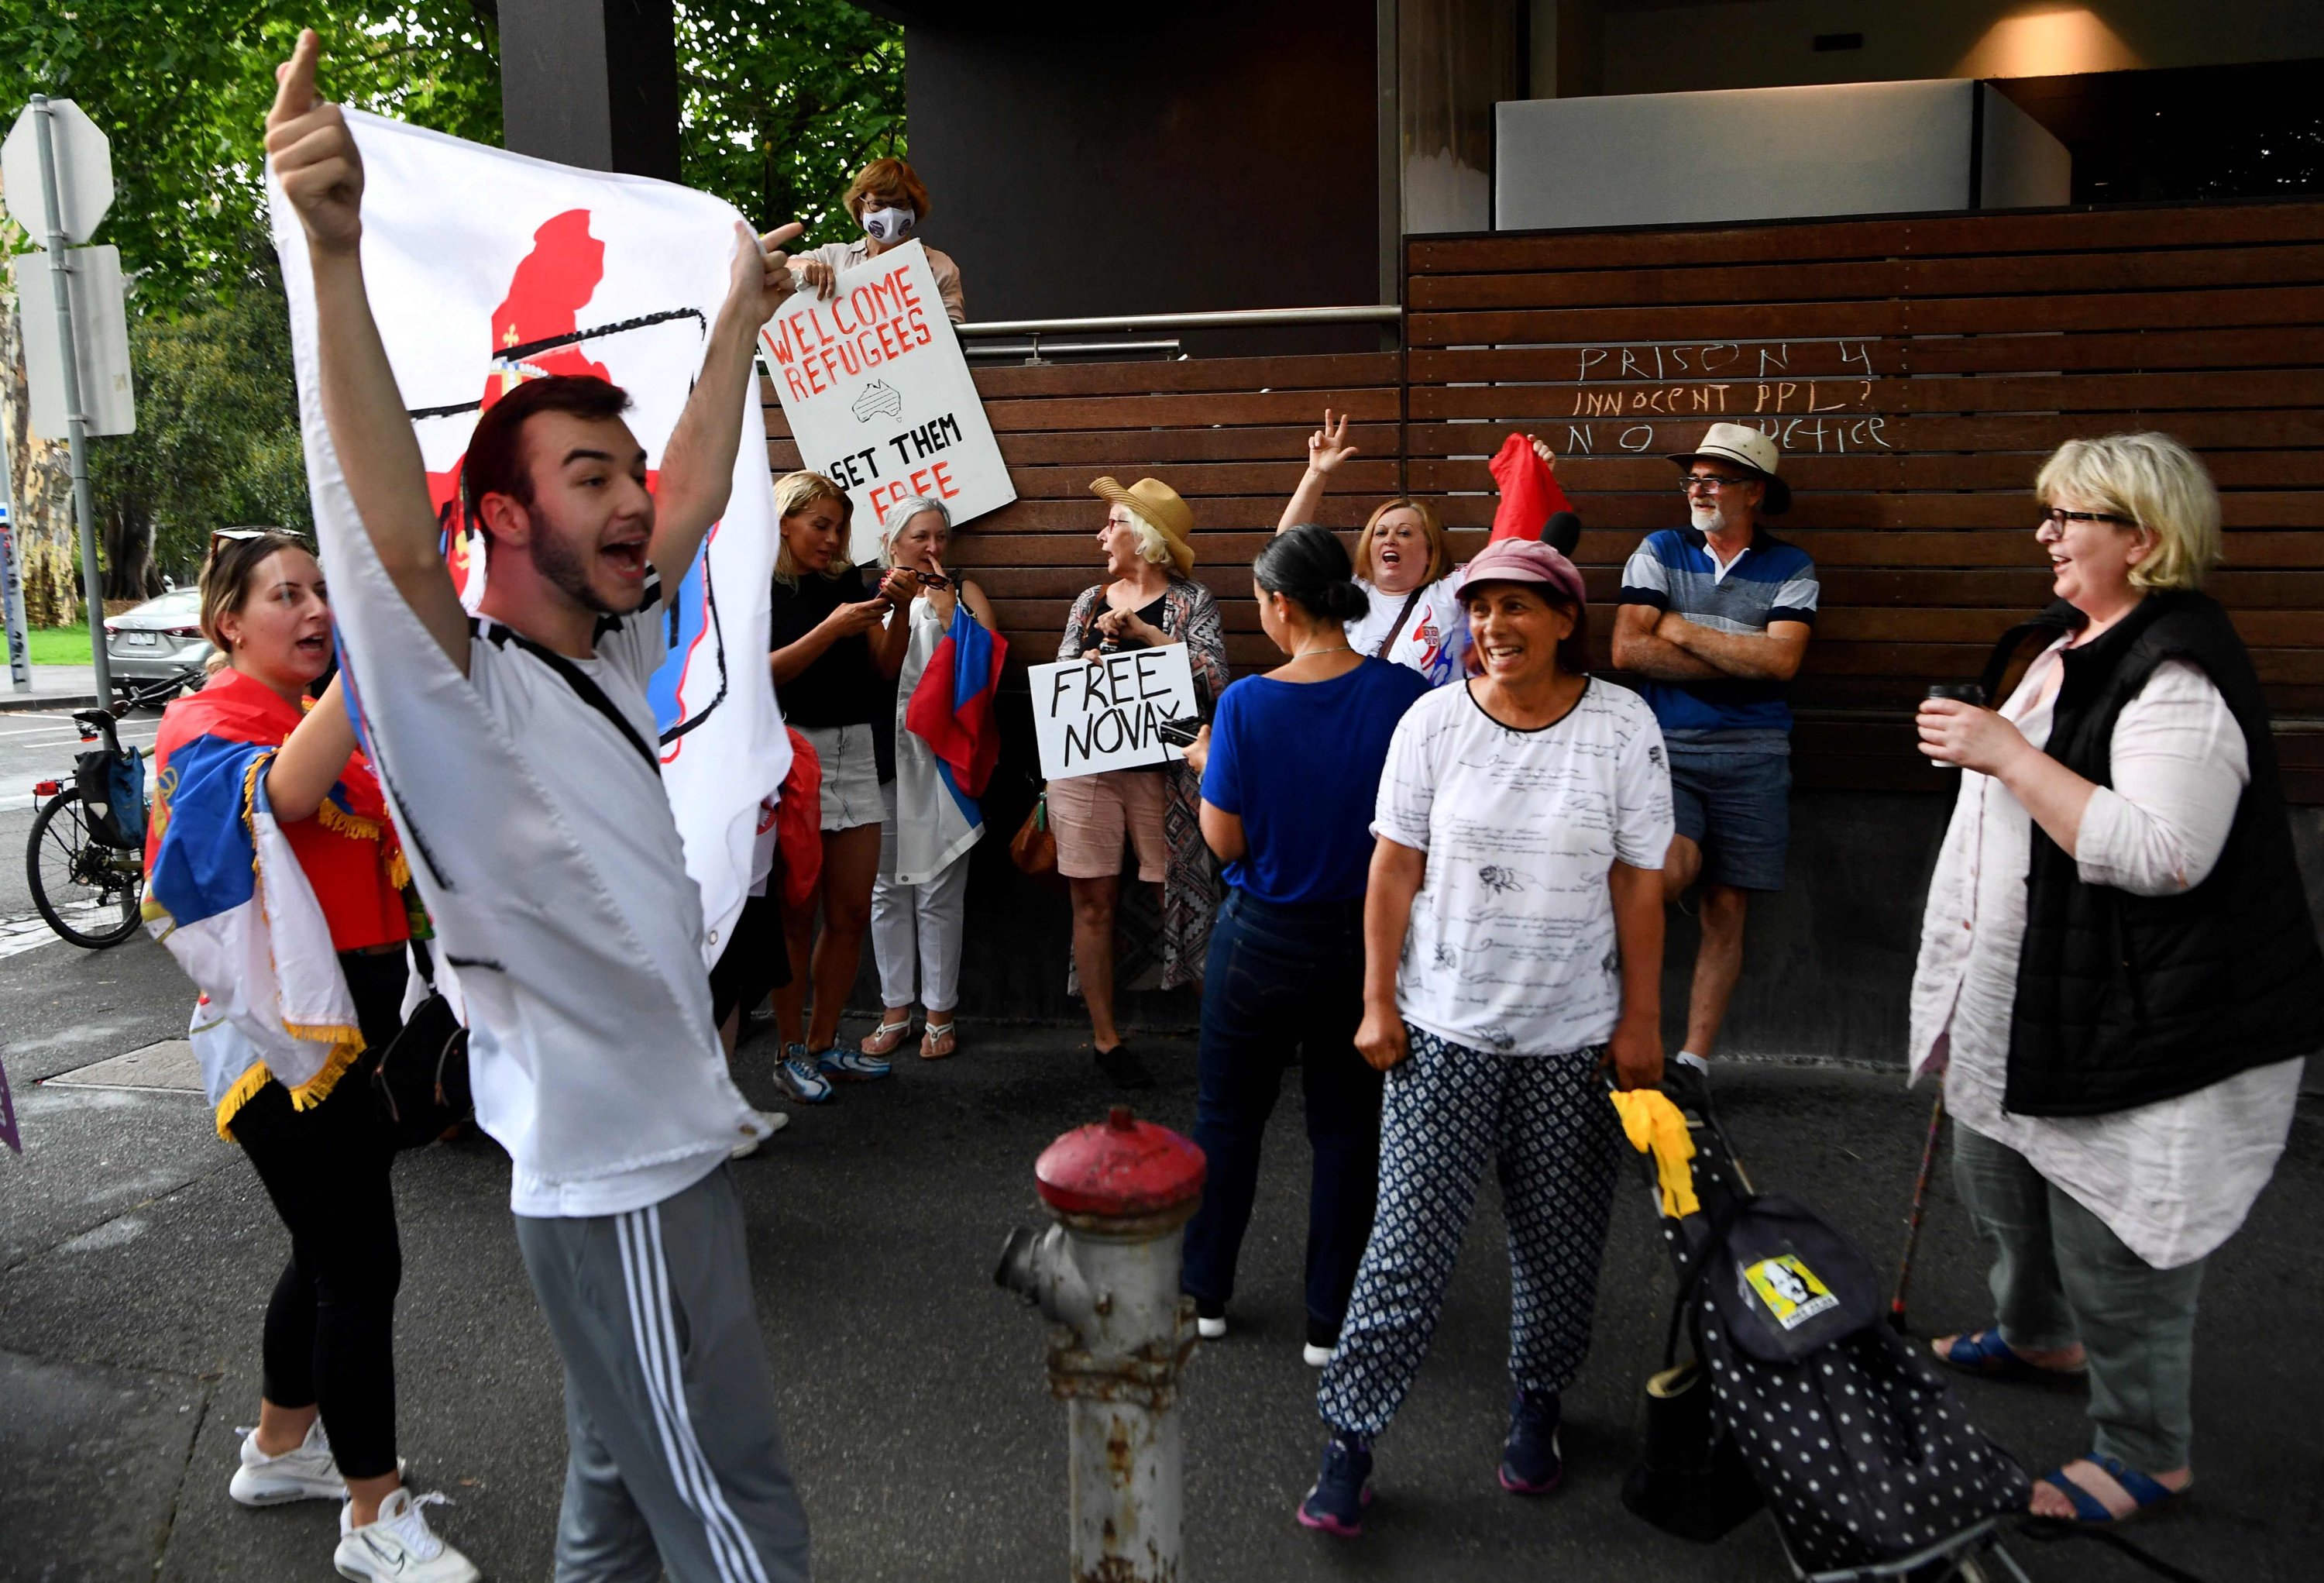 Members of the local Serbian community gather outside a hotel where Serbia's tennis champion Novak Djokovic is reported to be staying, Melbourne, Australia, Jan. 6, 2022. (AFP Photo)